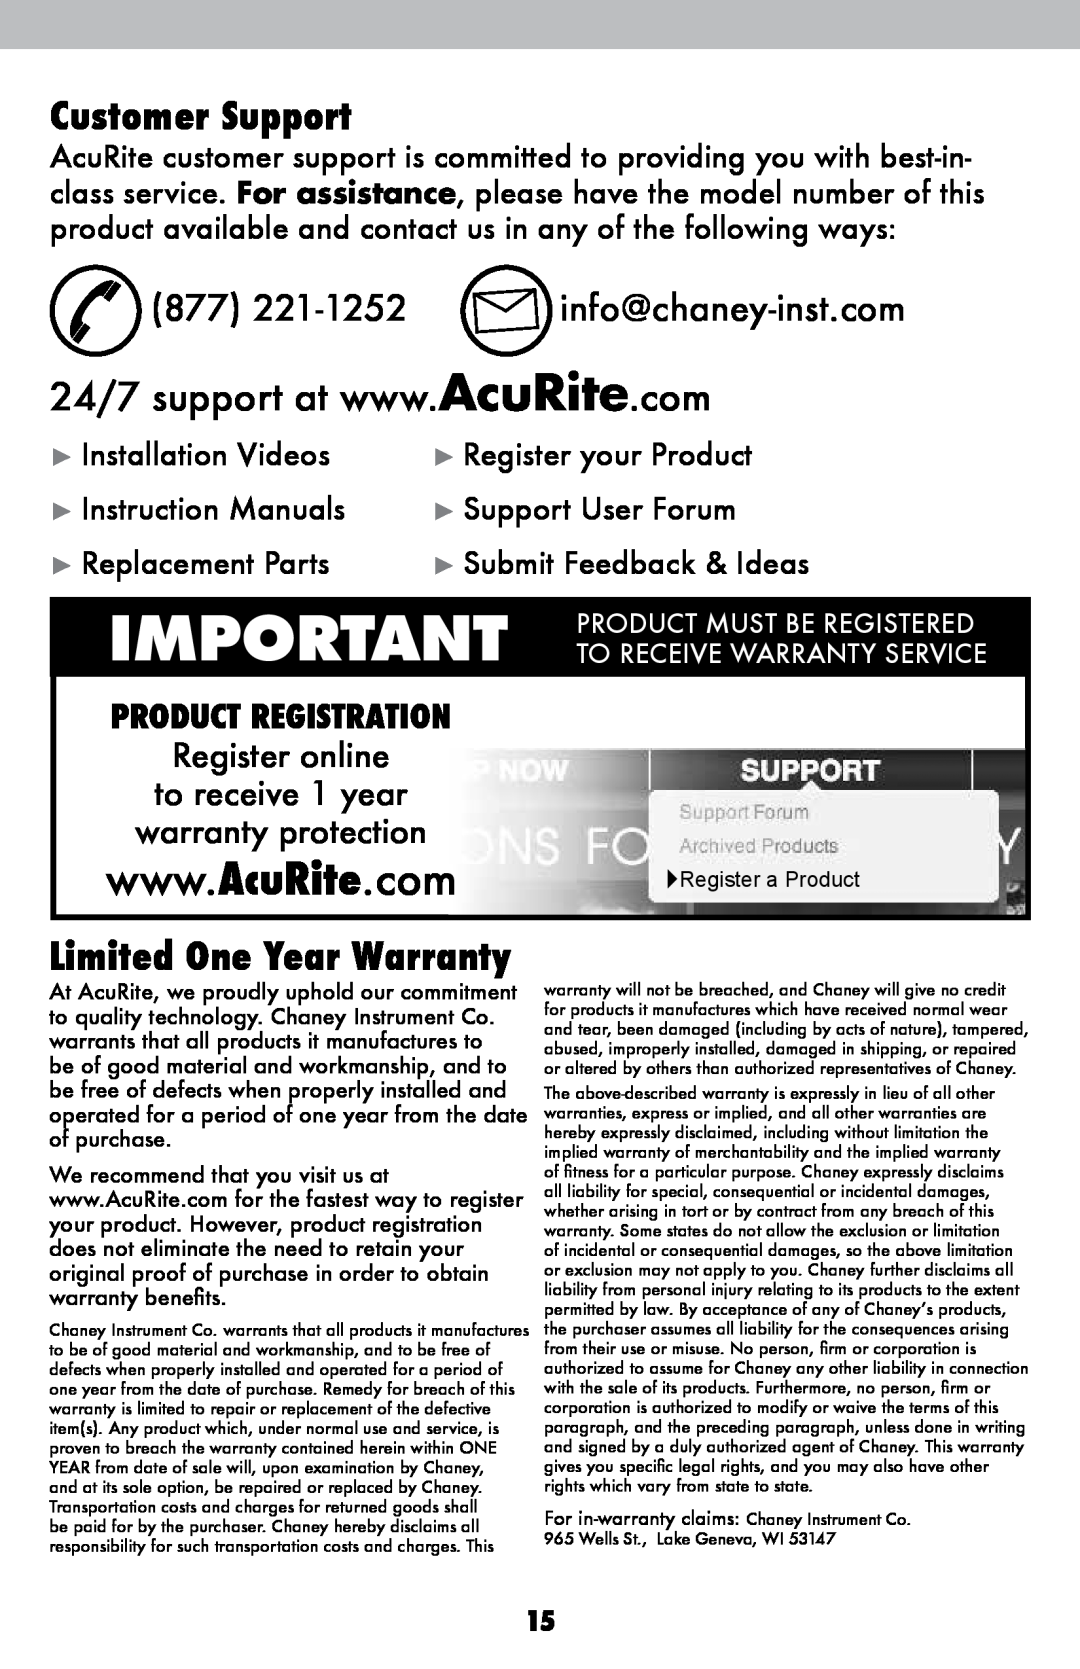 Acu-Rite 02022WB, 2027 Customer Support, 877 221-1252 info@chaney-inst.com, Limited One Year Warranty, Register online 